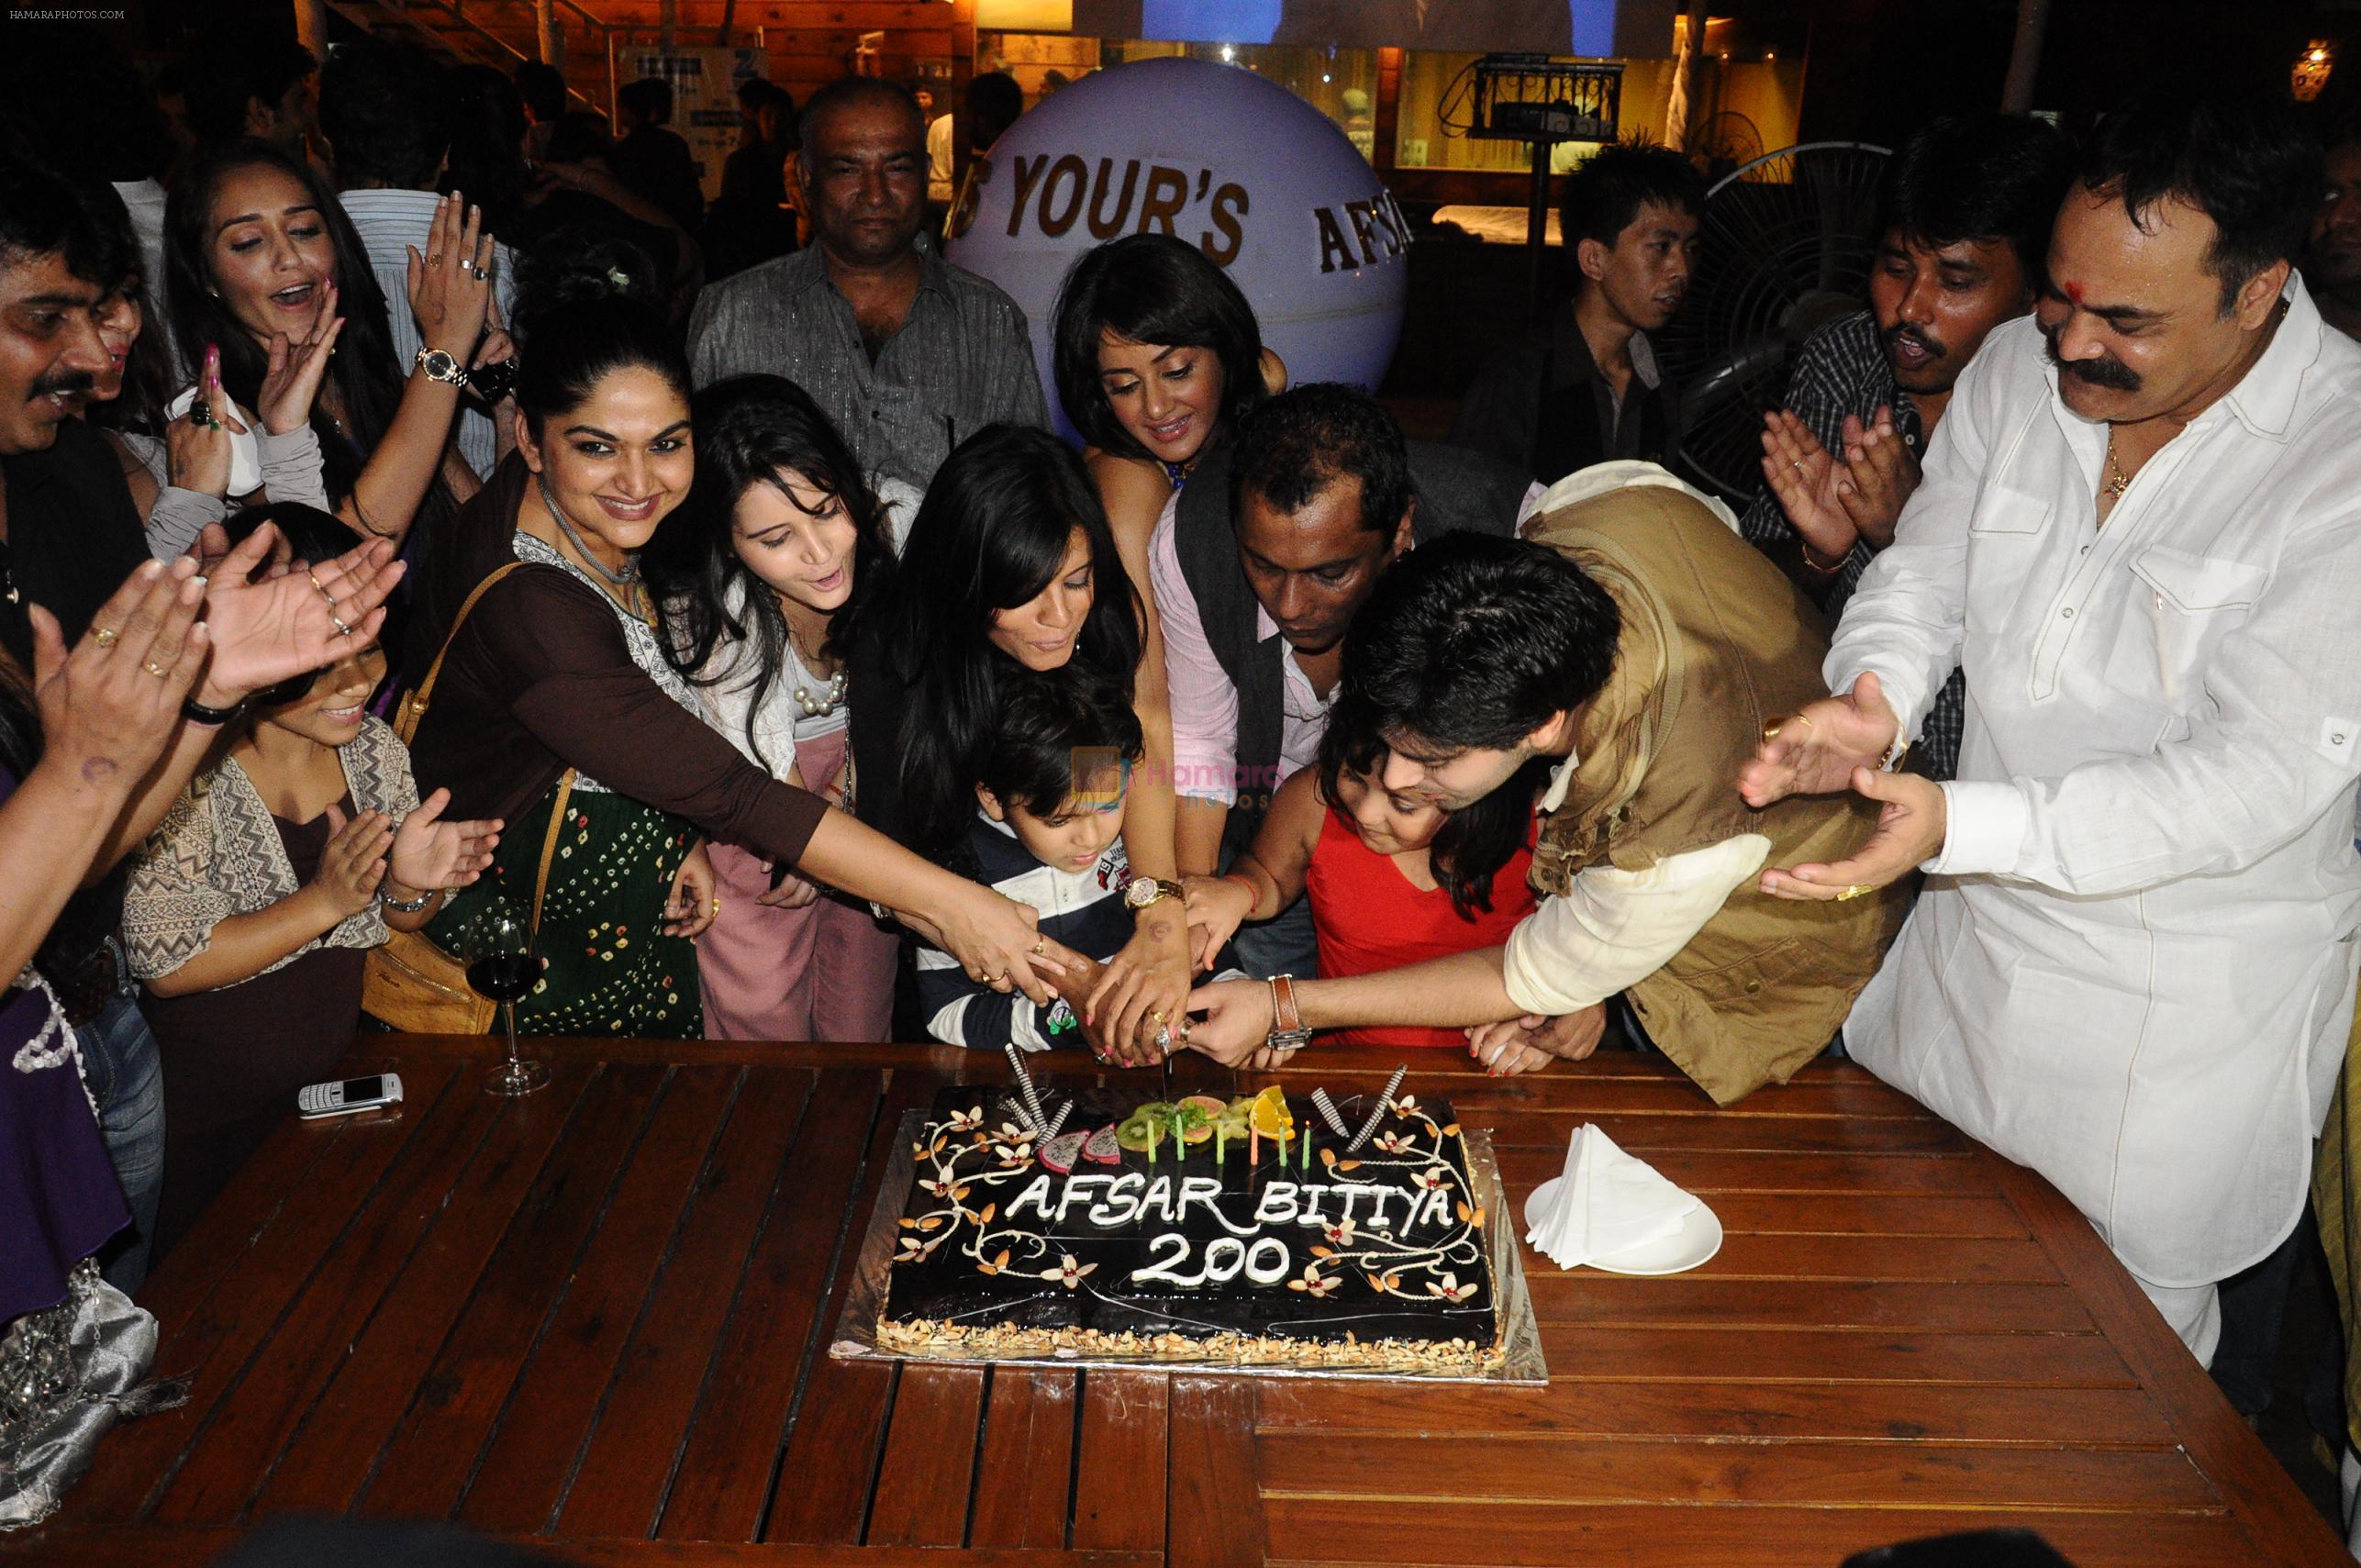 at the completion of 100 episodes in Afsar Bitiya on Zee TV by Raakesh Paswan in Sky Lounge, Juhu, Mumbai on 28th Sept 2012